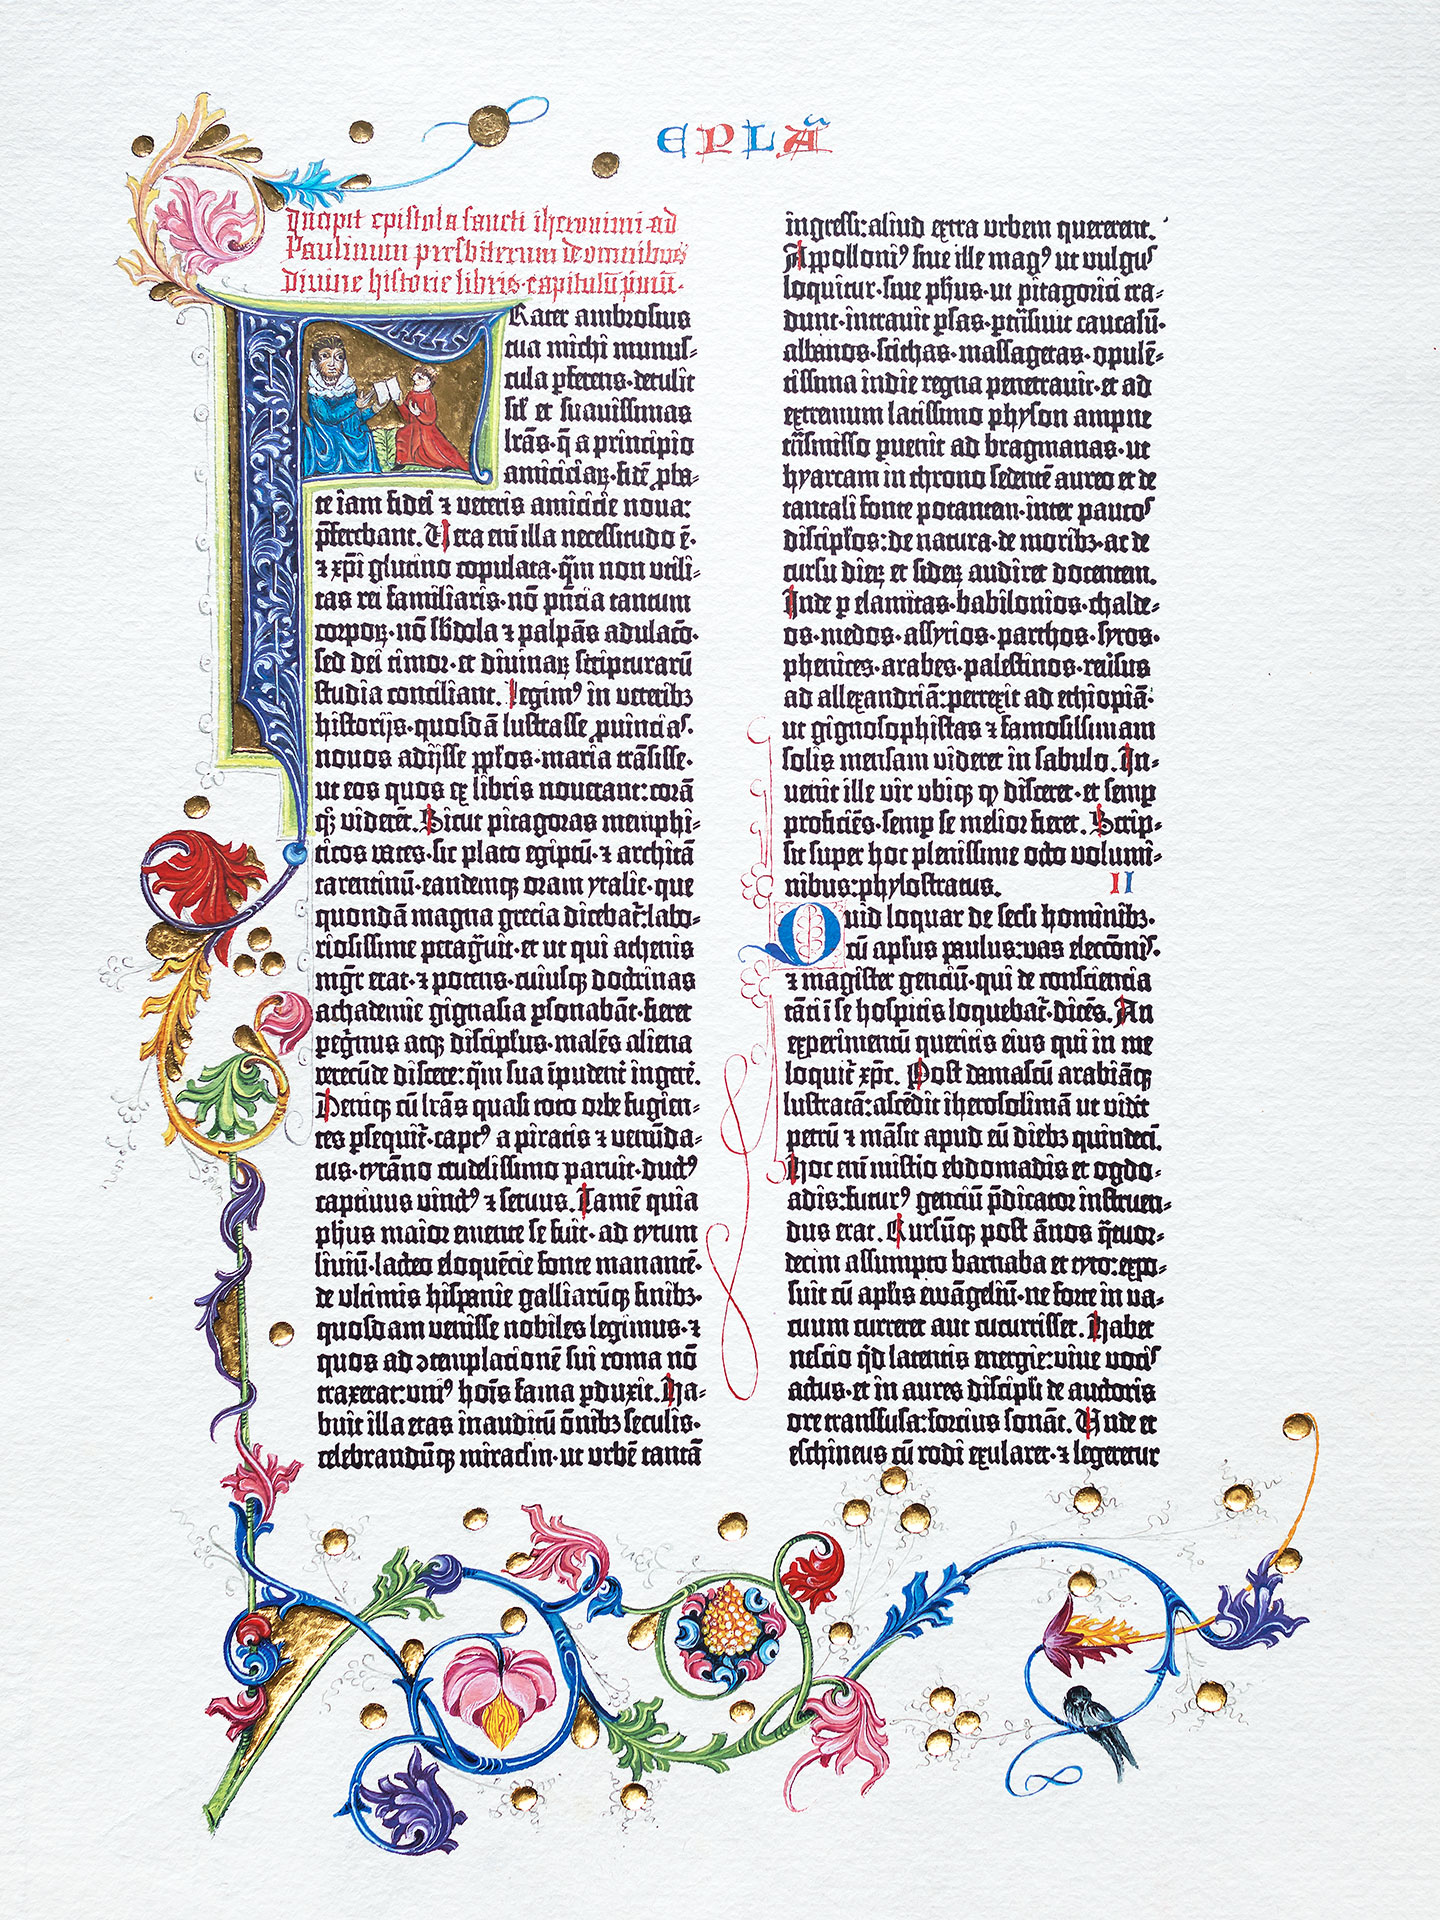 Epistle of St Jerome to Paulinus. Ornamental page from the Berlin copy of the Gutenberg Bible